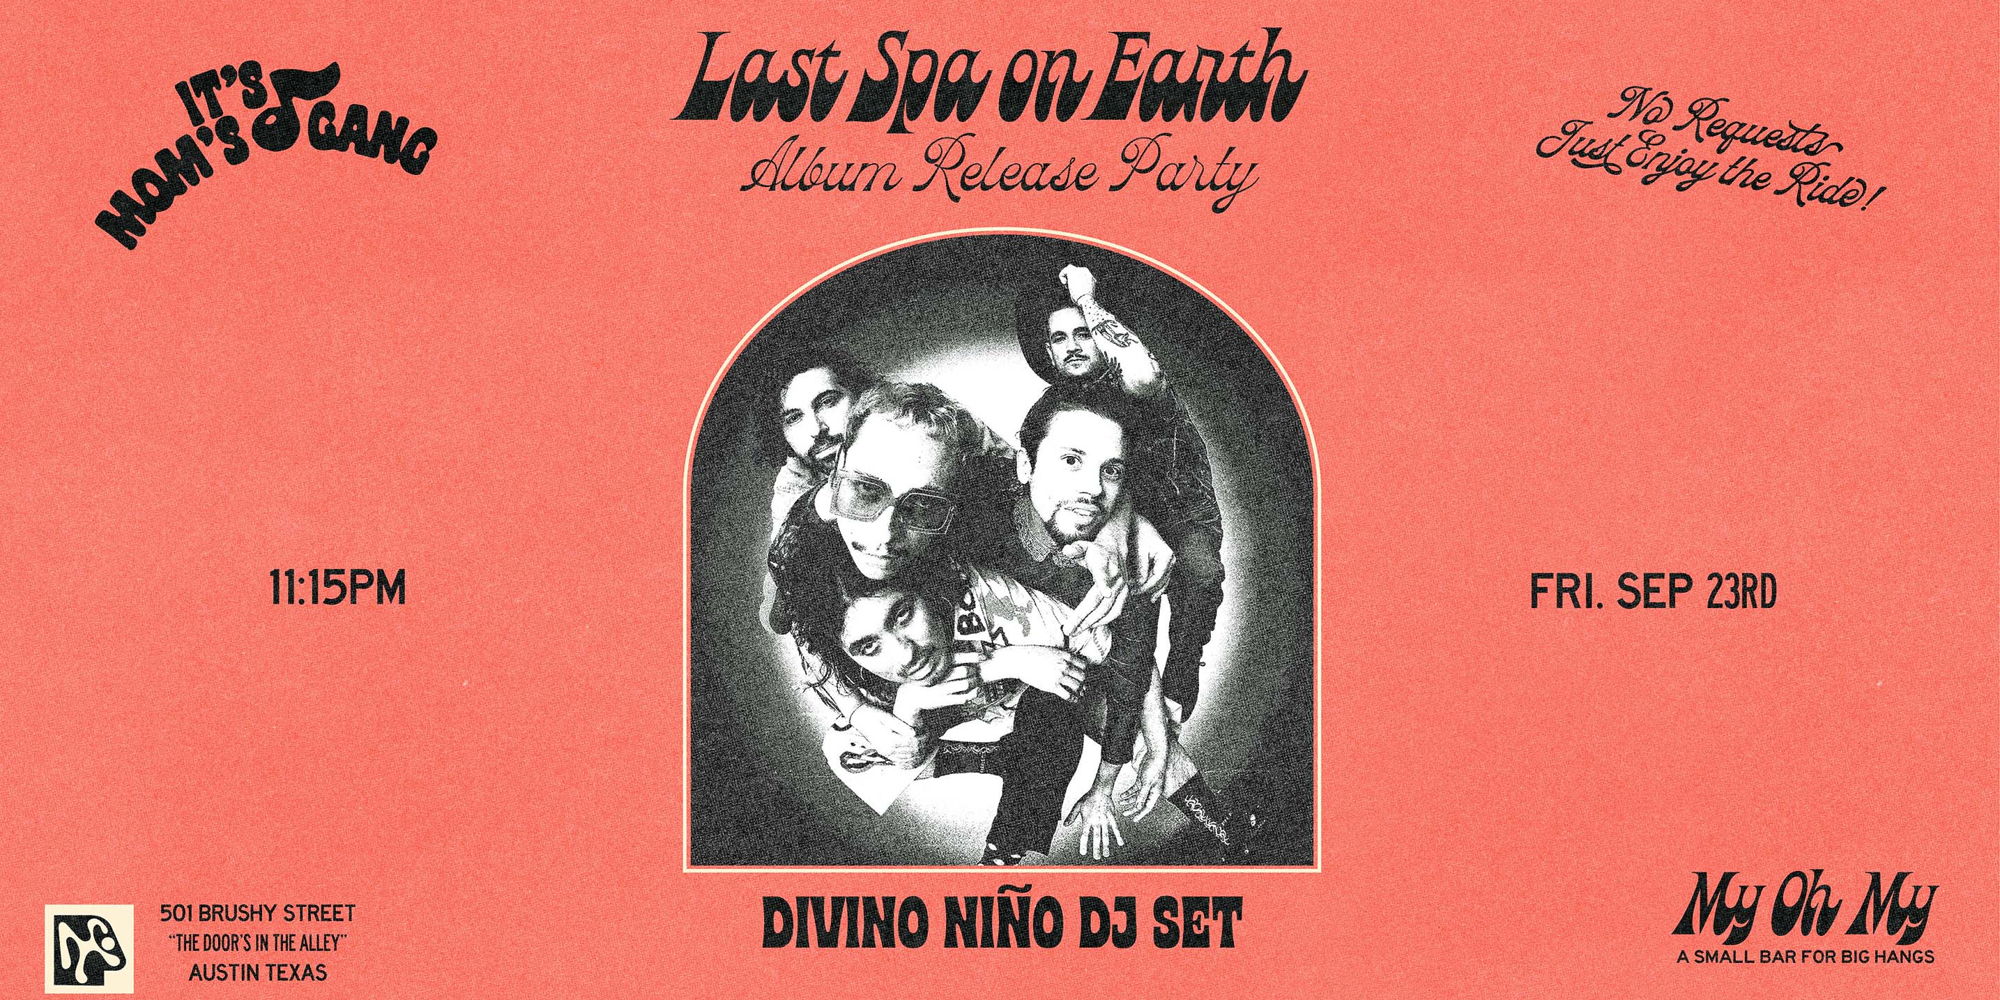 My Oh My w/ Divino Niño (DJ Set) - Last Spa on Earth - Album Release Party promotional image